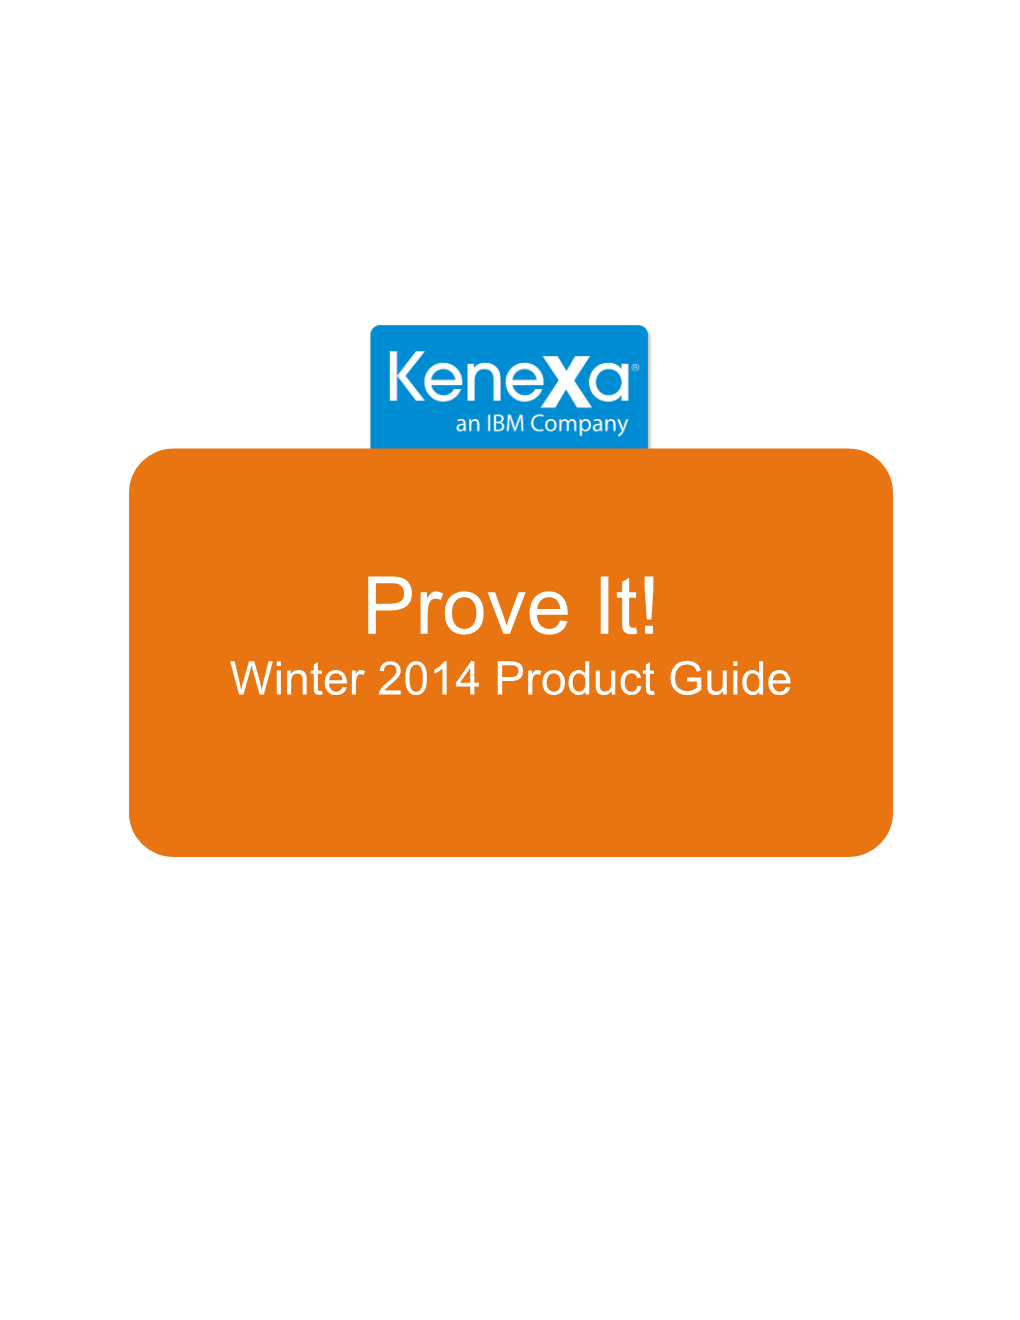 Prove It! Winter 2014 Product Guide